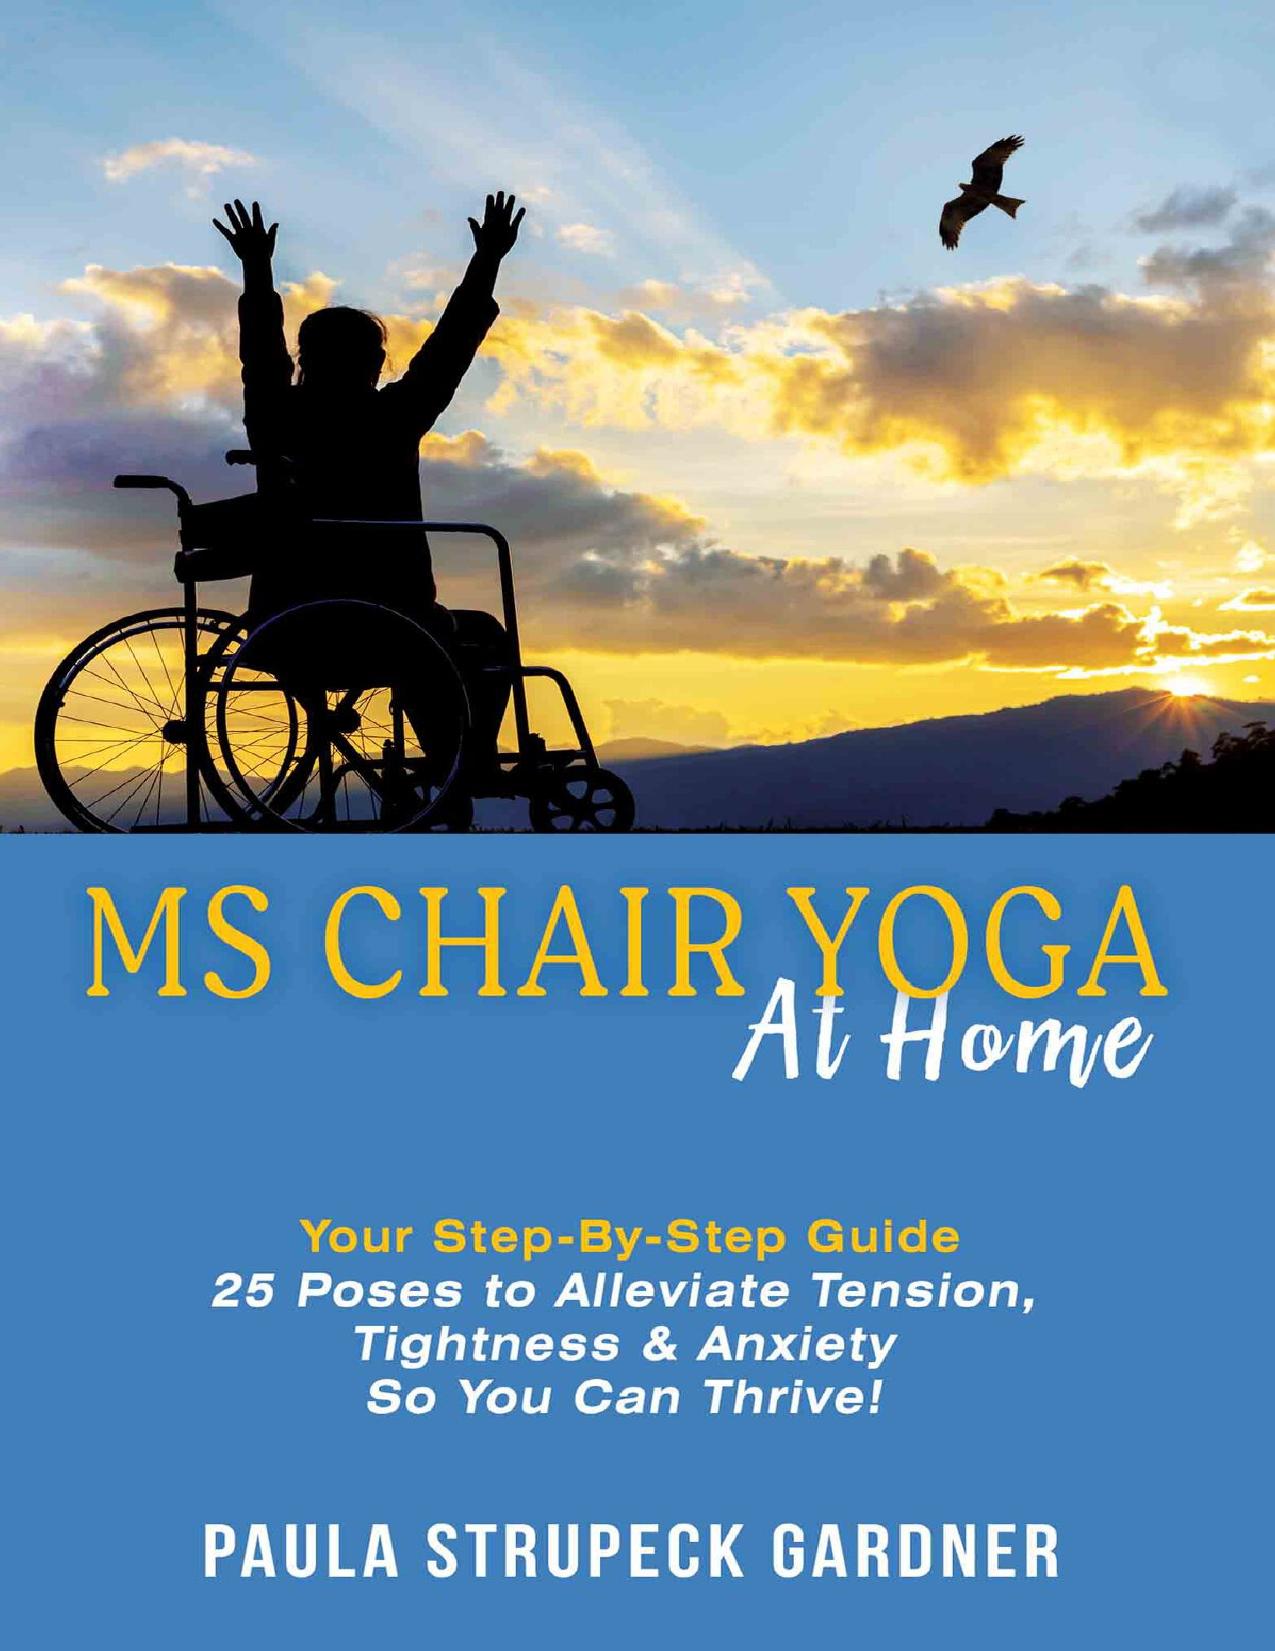 MS Chair Yoga Your Step-By-Step Guide: 25 Poses to Alleviate Tension, Tightness, and Anxiety So You Can Thrive by Strupeck Gardner Paula